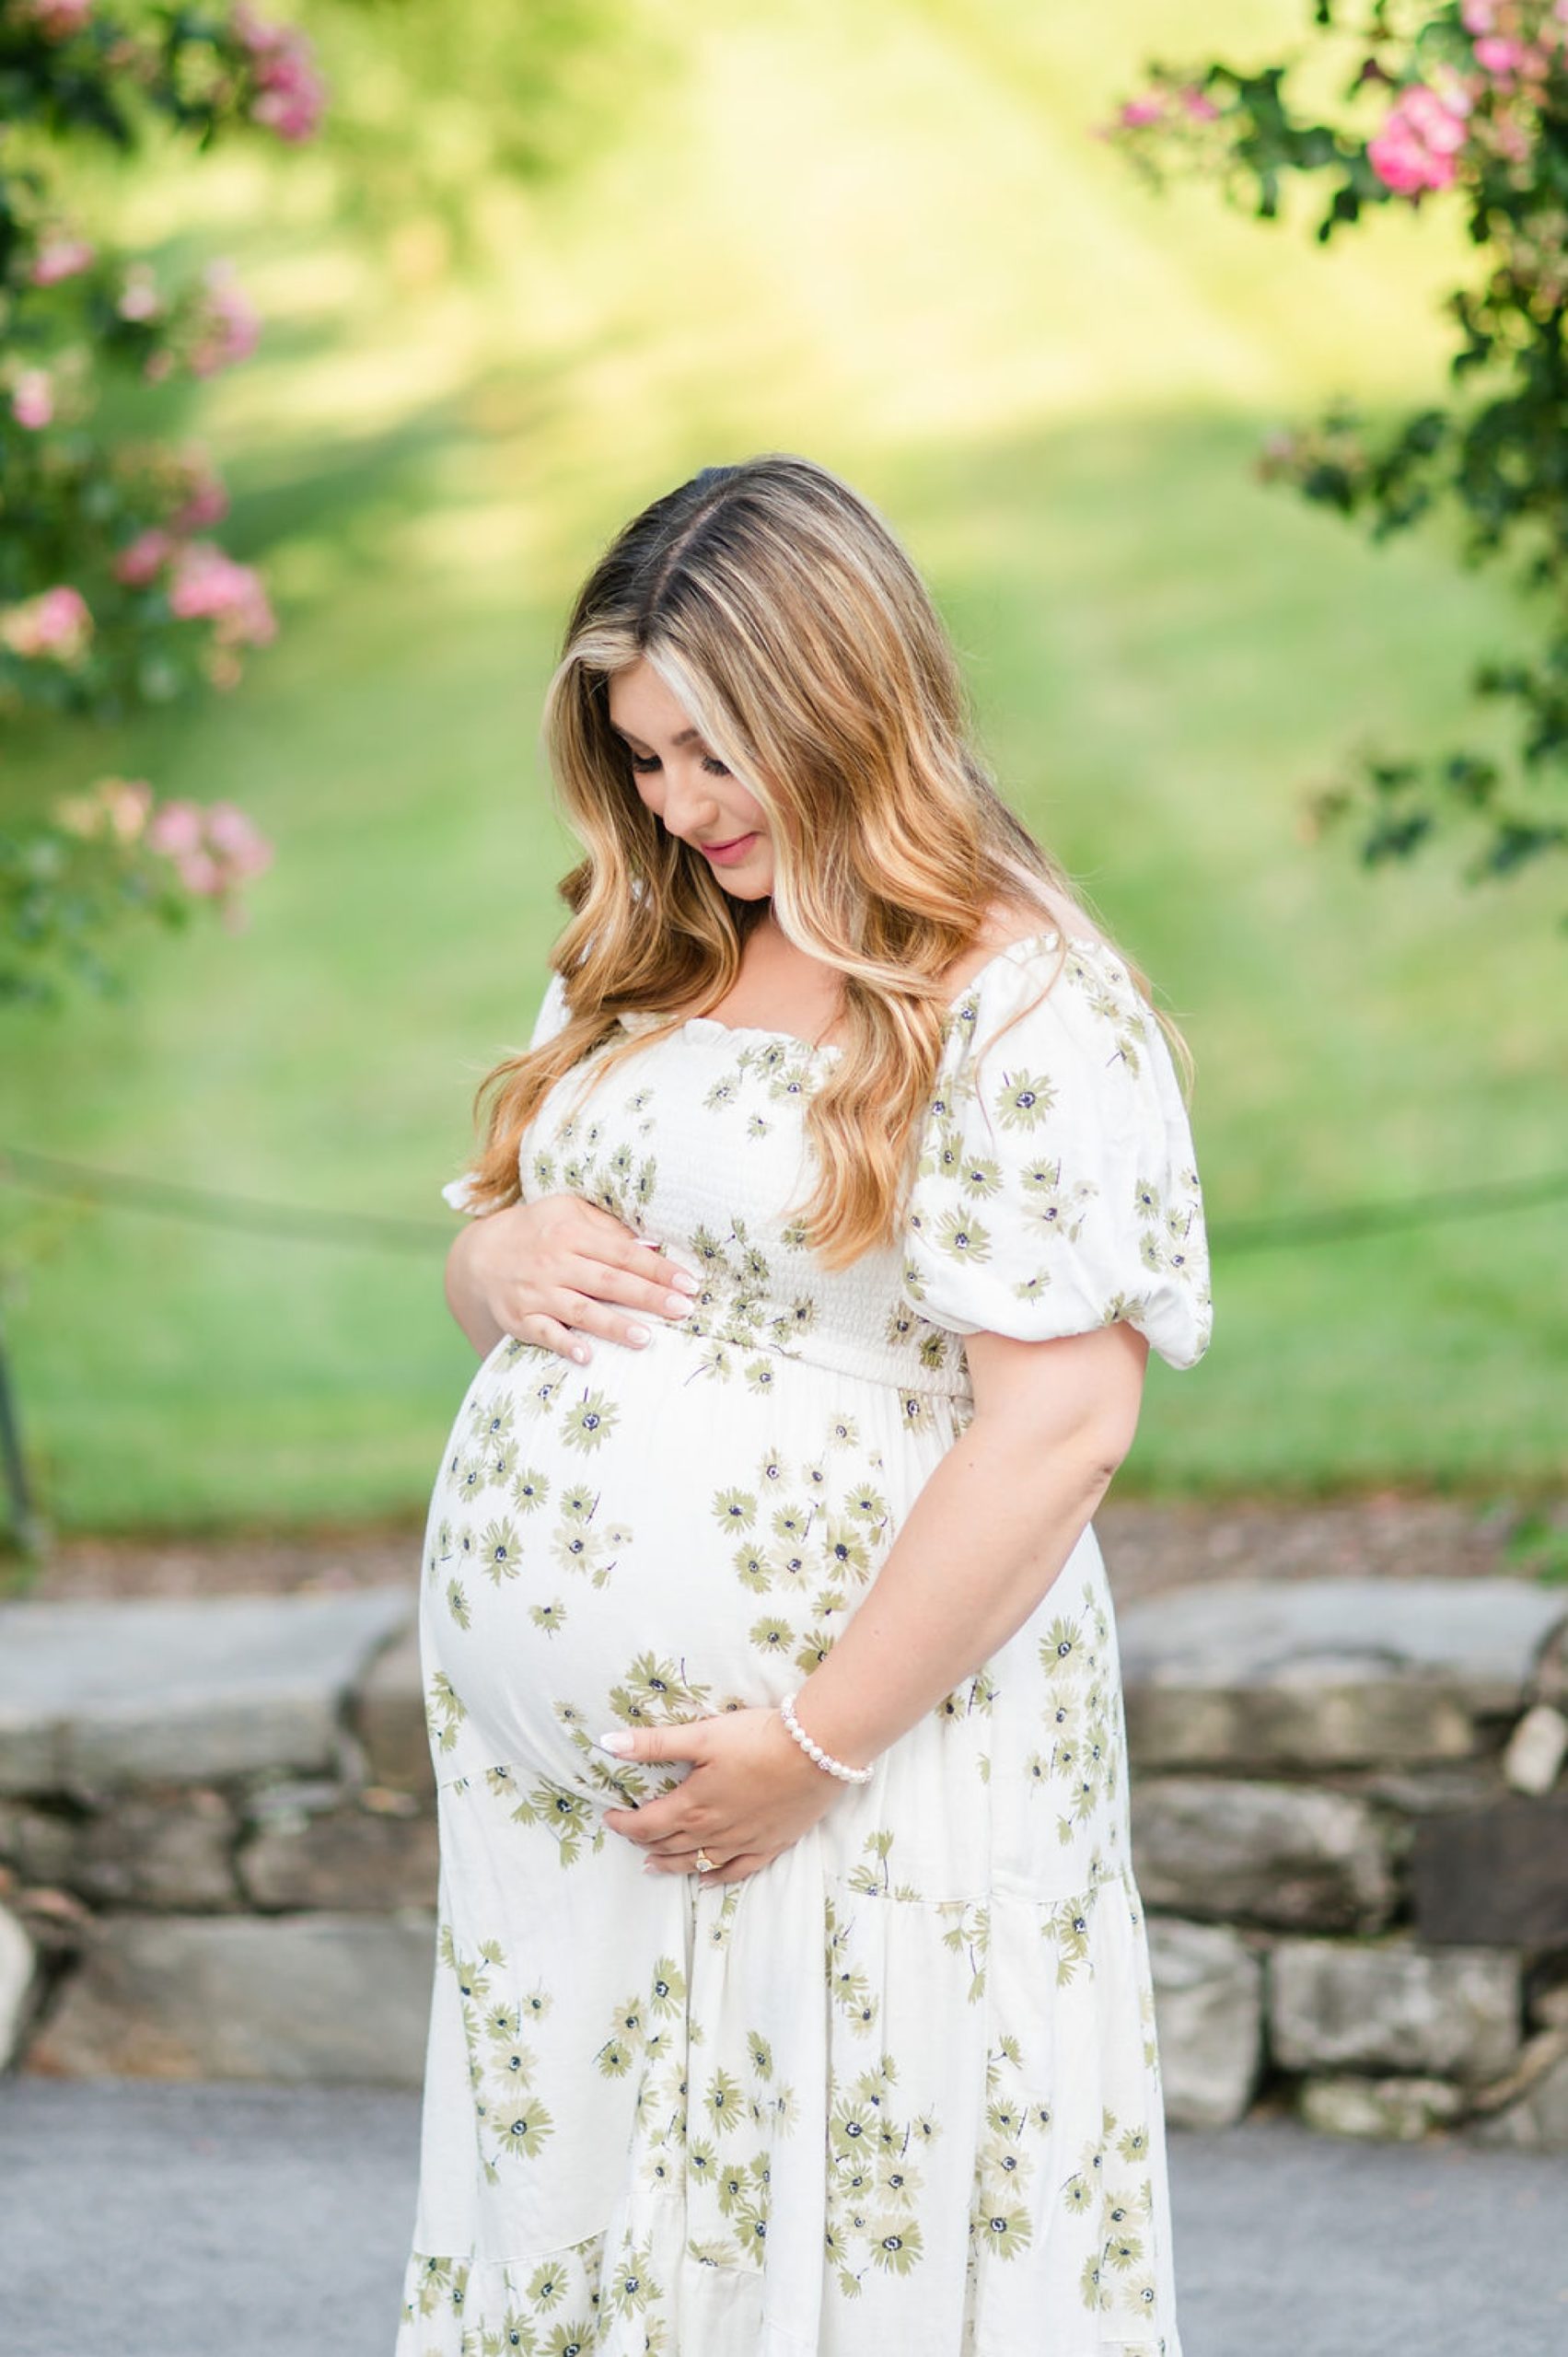 expecting mother looks down at bump wearing green and white dress